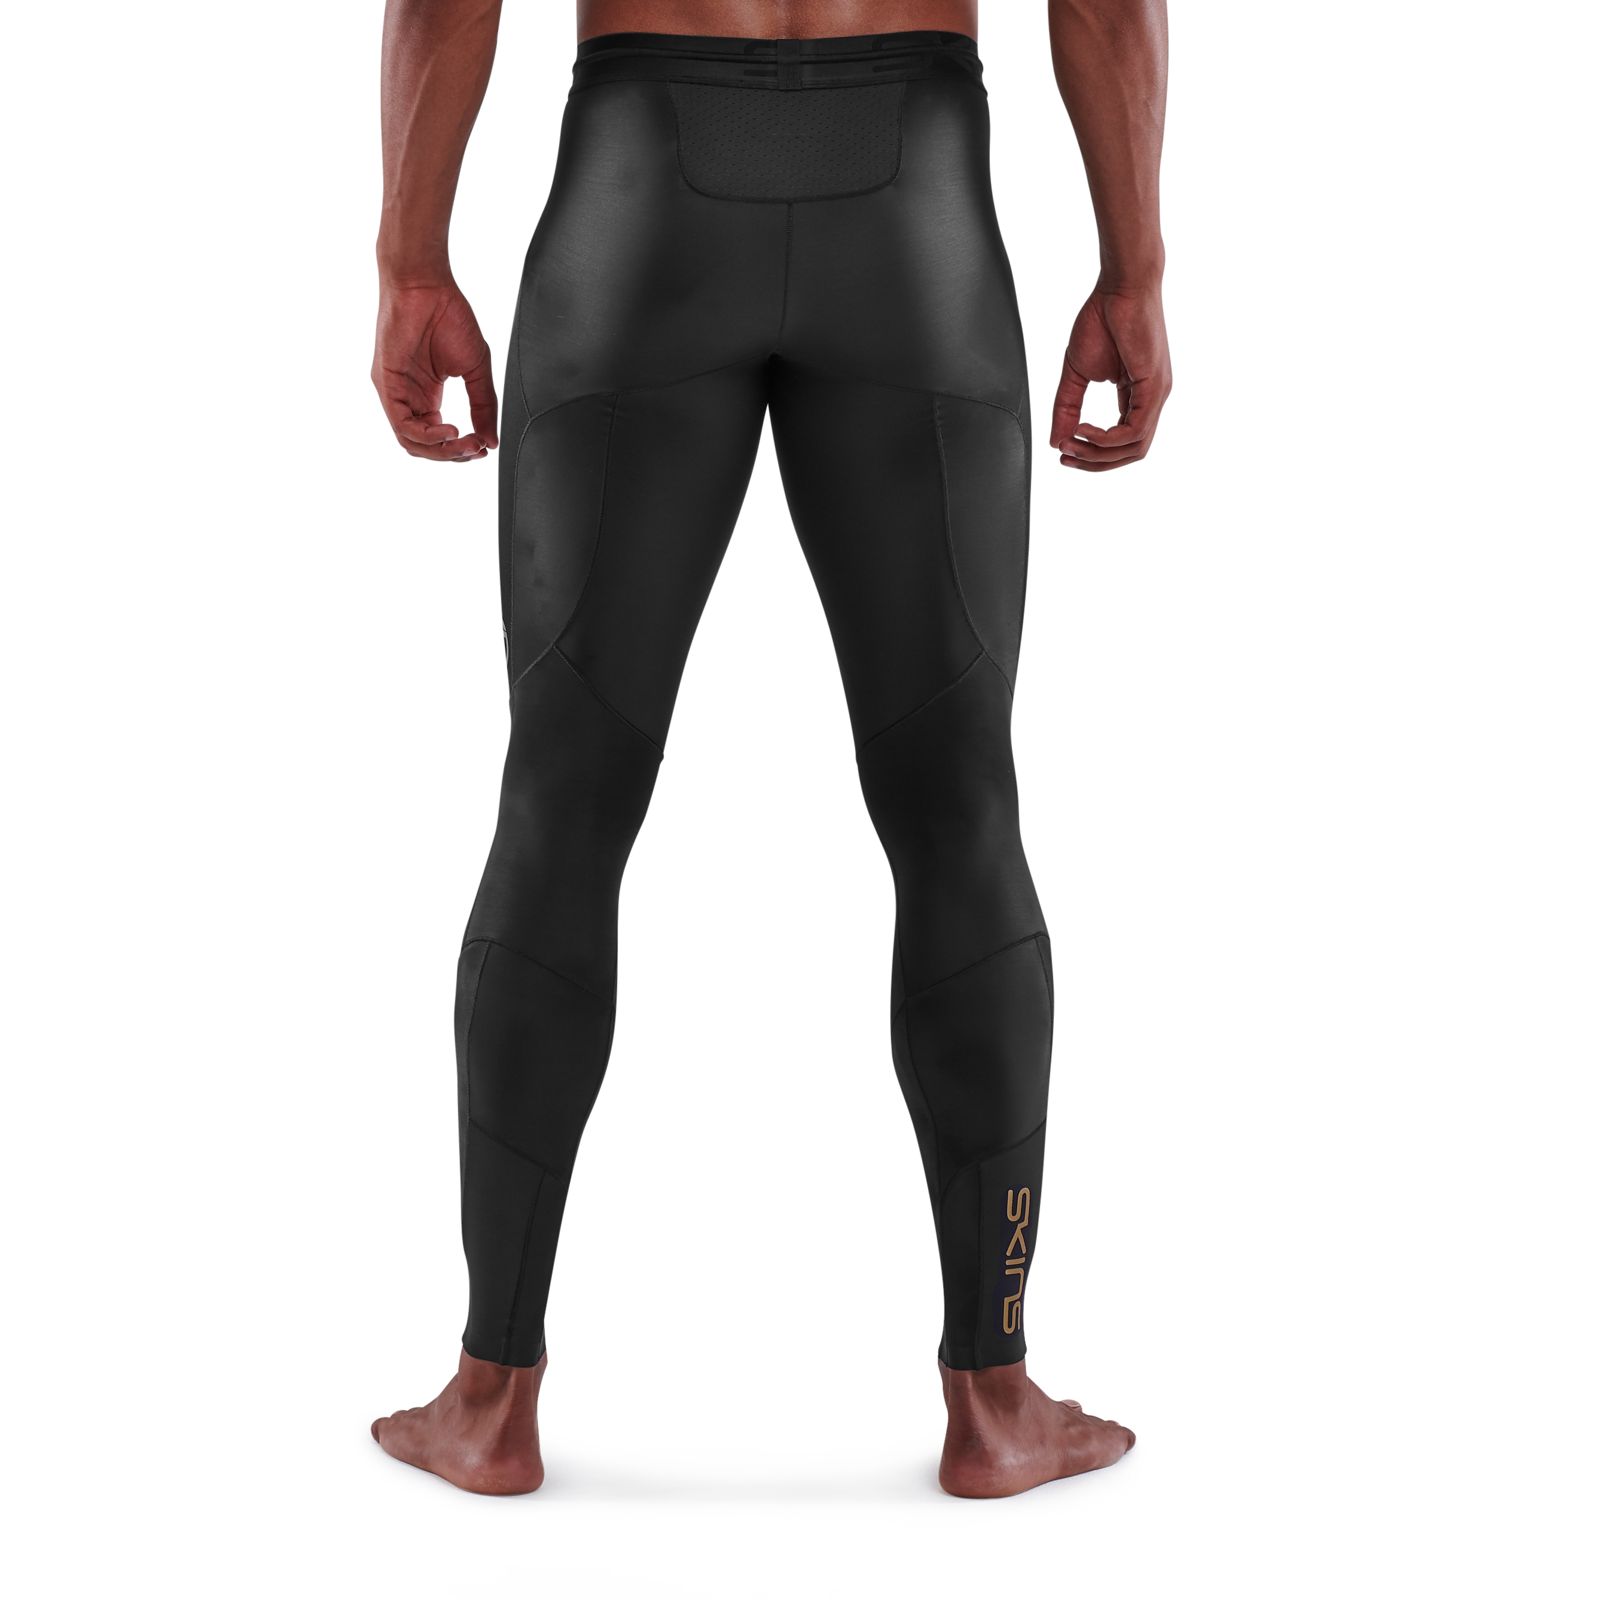 Skins Compression, High Performance Clothing